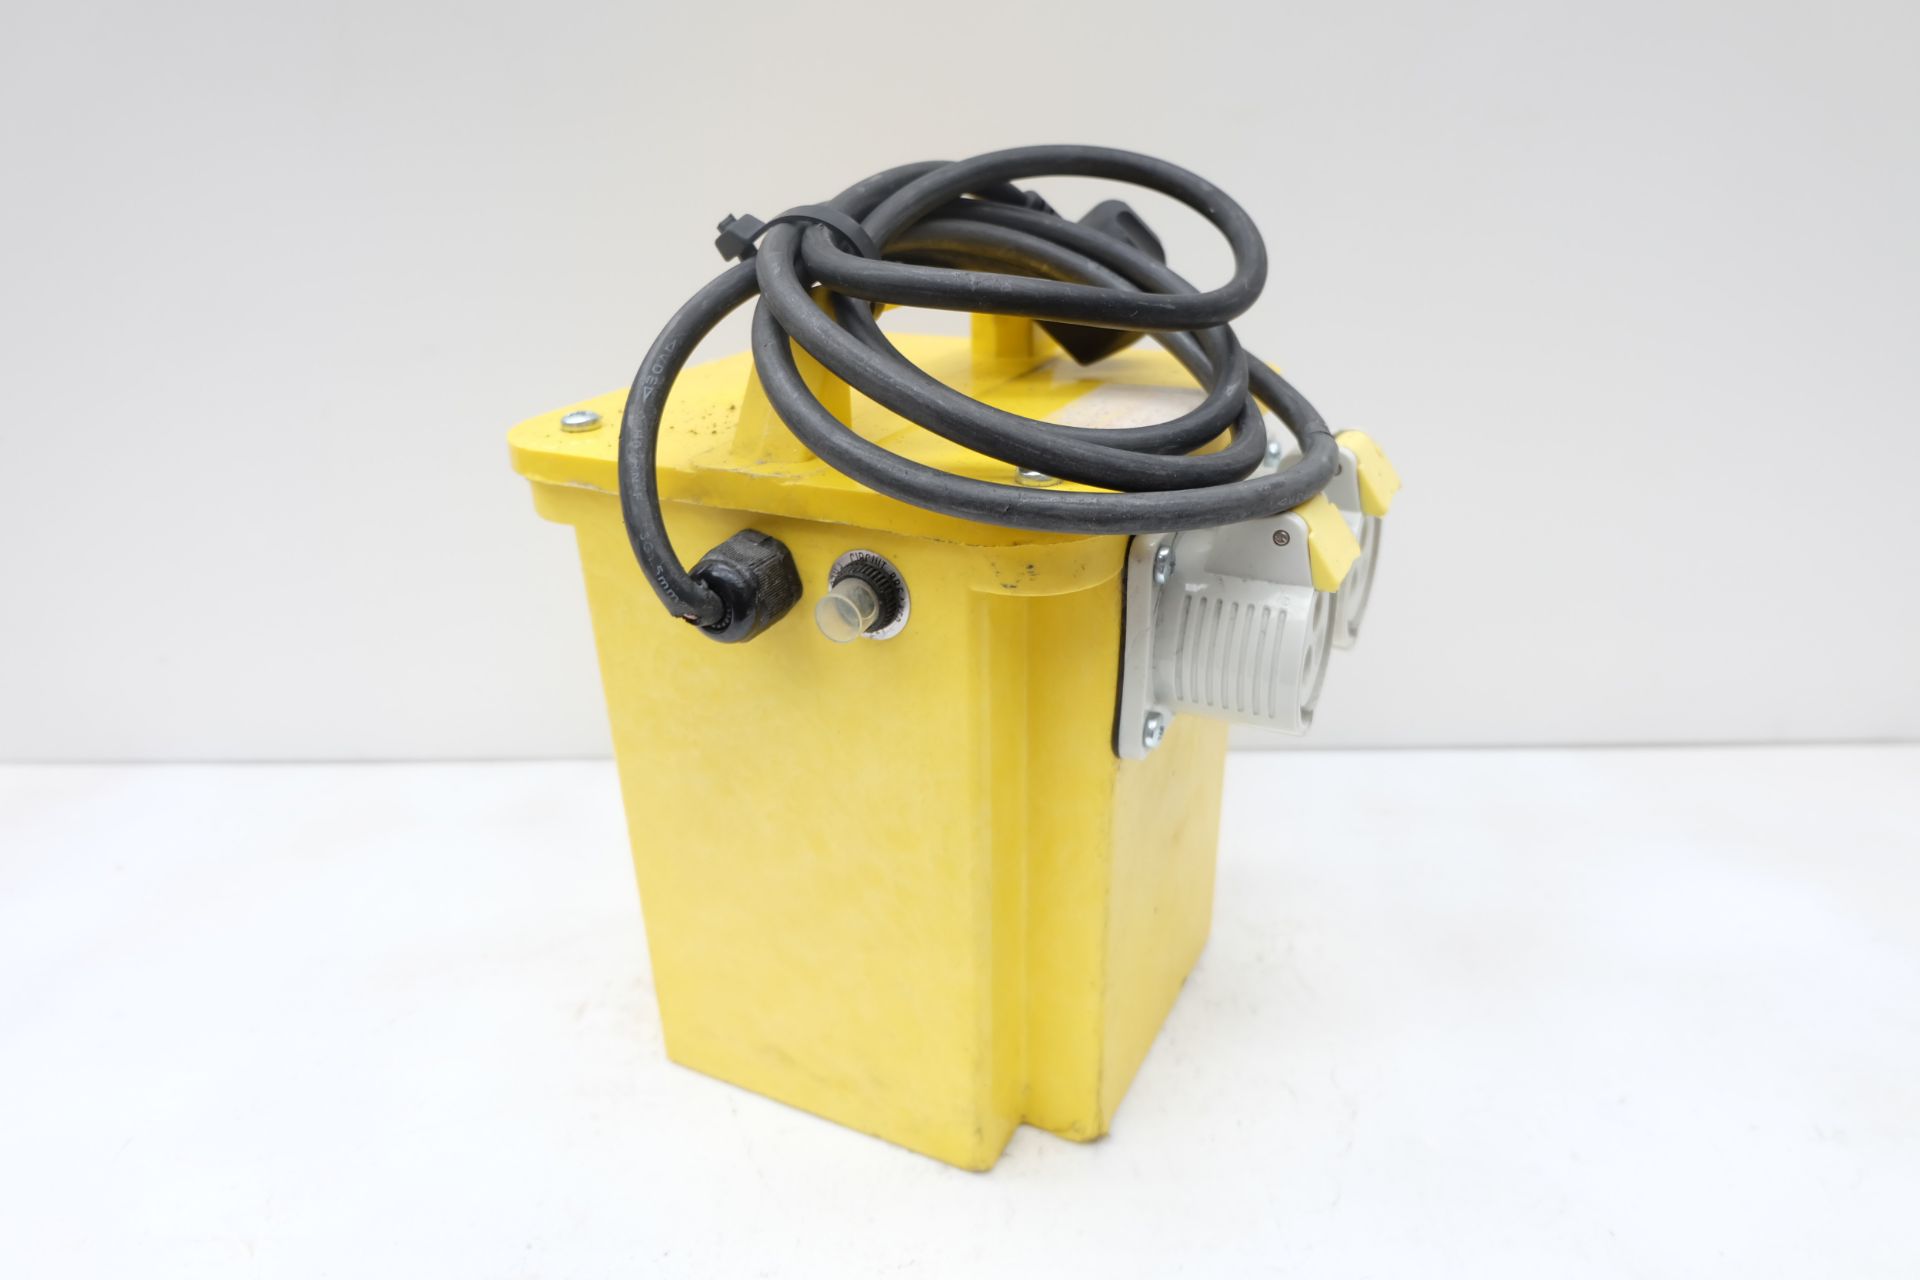 240V to 110V Double Socket Power Tool Step Down Transformer. - Image 2 of 3